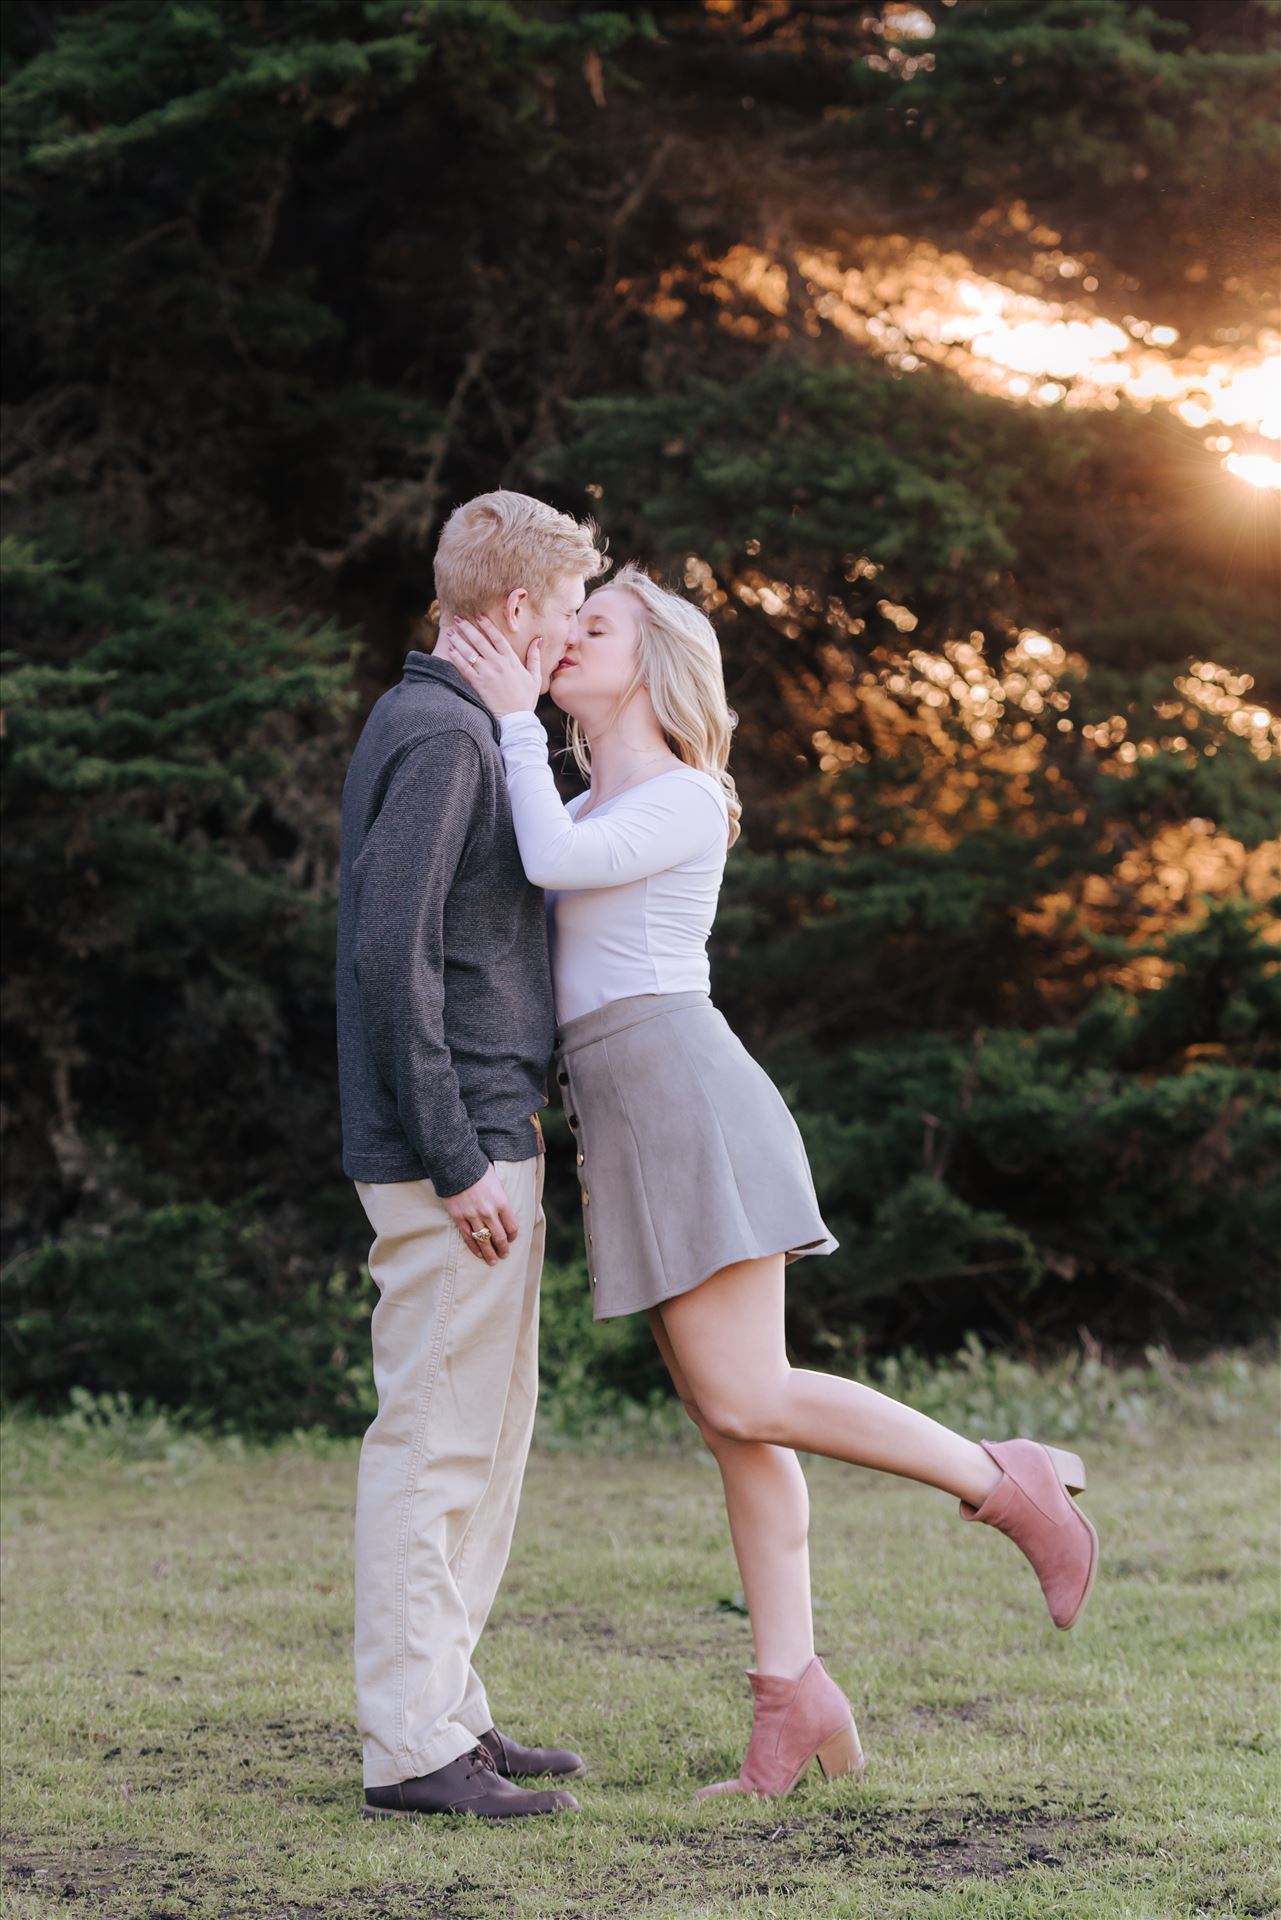 DSC_2452.JPG - San Luis Obispo and Santa Barbara County Wedding and Engagement Photography. Mirror's Edge Photography captures Montana de Oro Engagement Session.  Kissing at sunset. by Sarah Williams